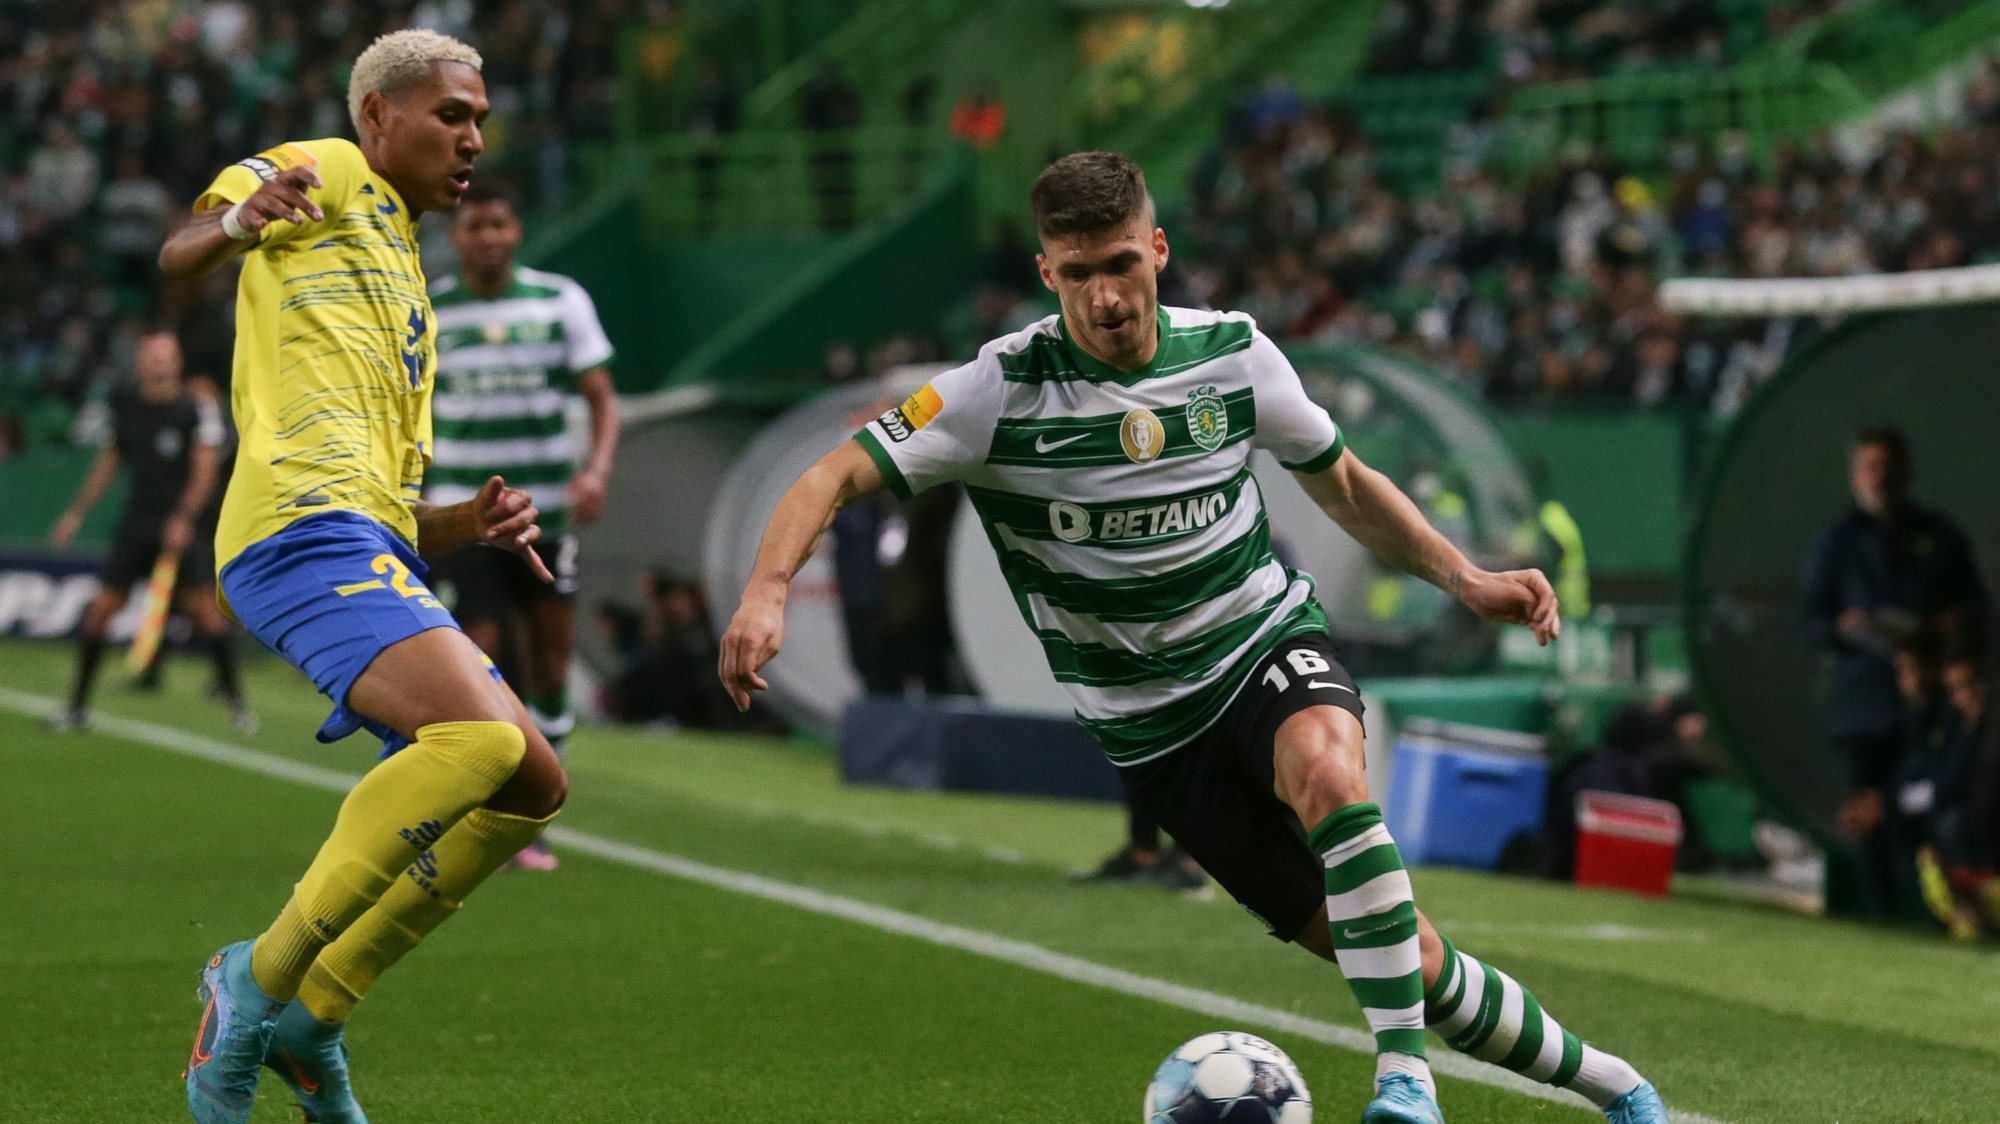 Sporting&#039;s Ruben Vinagre (R) in action against FC Arouca&#039;s Anthony Alves (L) during the Portuguese First League soccer match between Sporting and FC Arouca at Alvalade stadium in Lisbon, Portugal, 05 March 2022. TIAGO PETINGA/LUSA